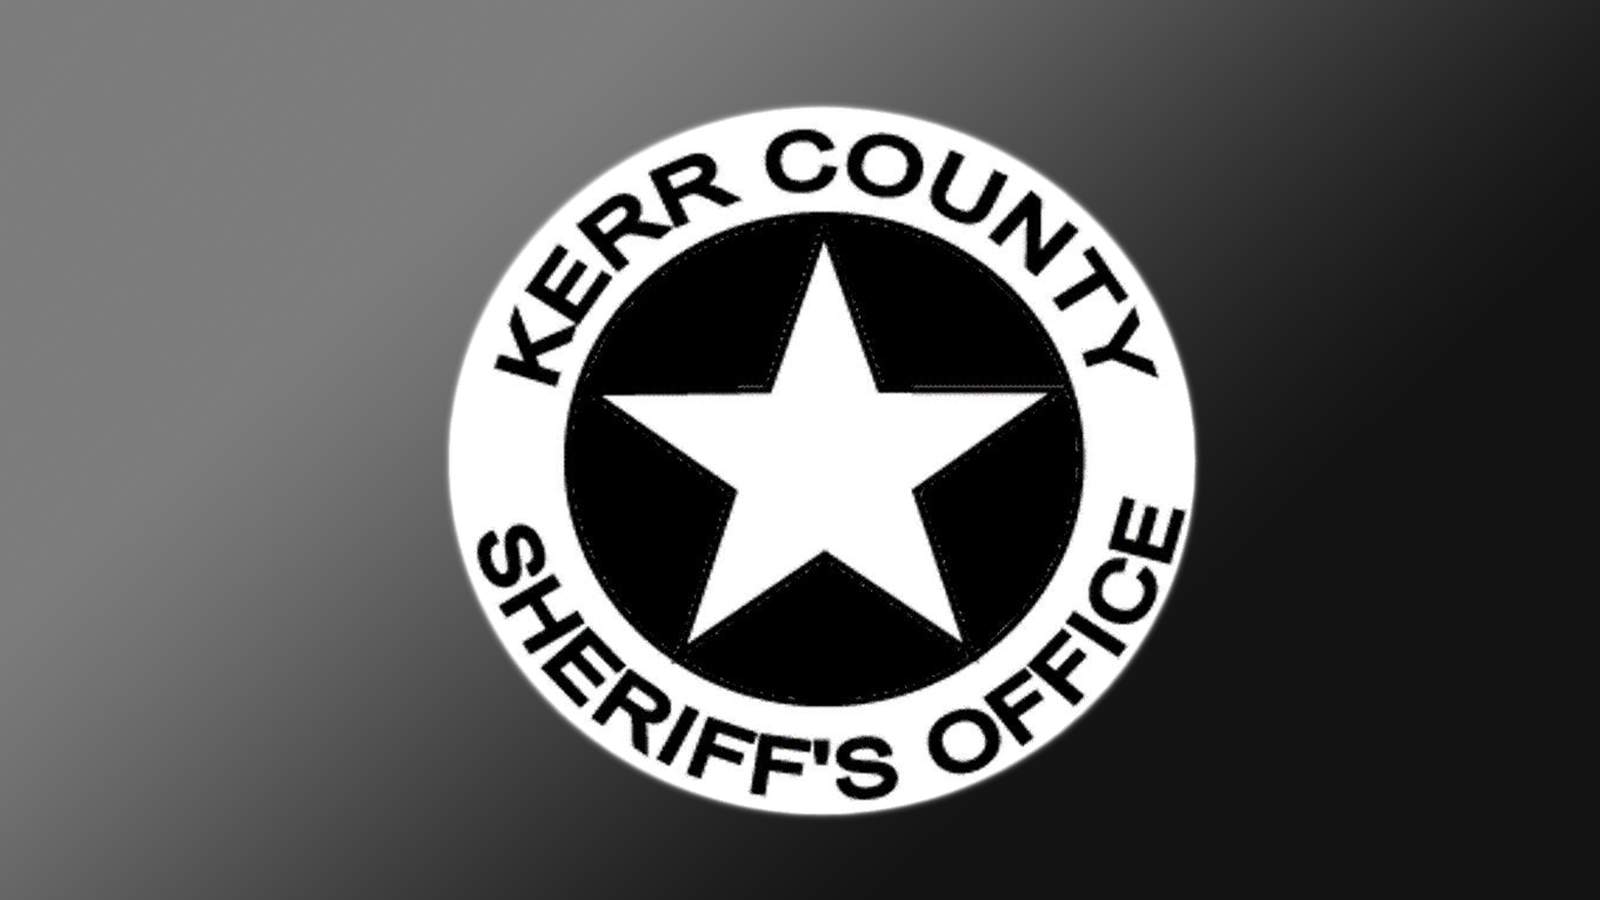 Retired Houston police officer fatally shot by neighbor in Kerr County, sheriff’s office says